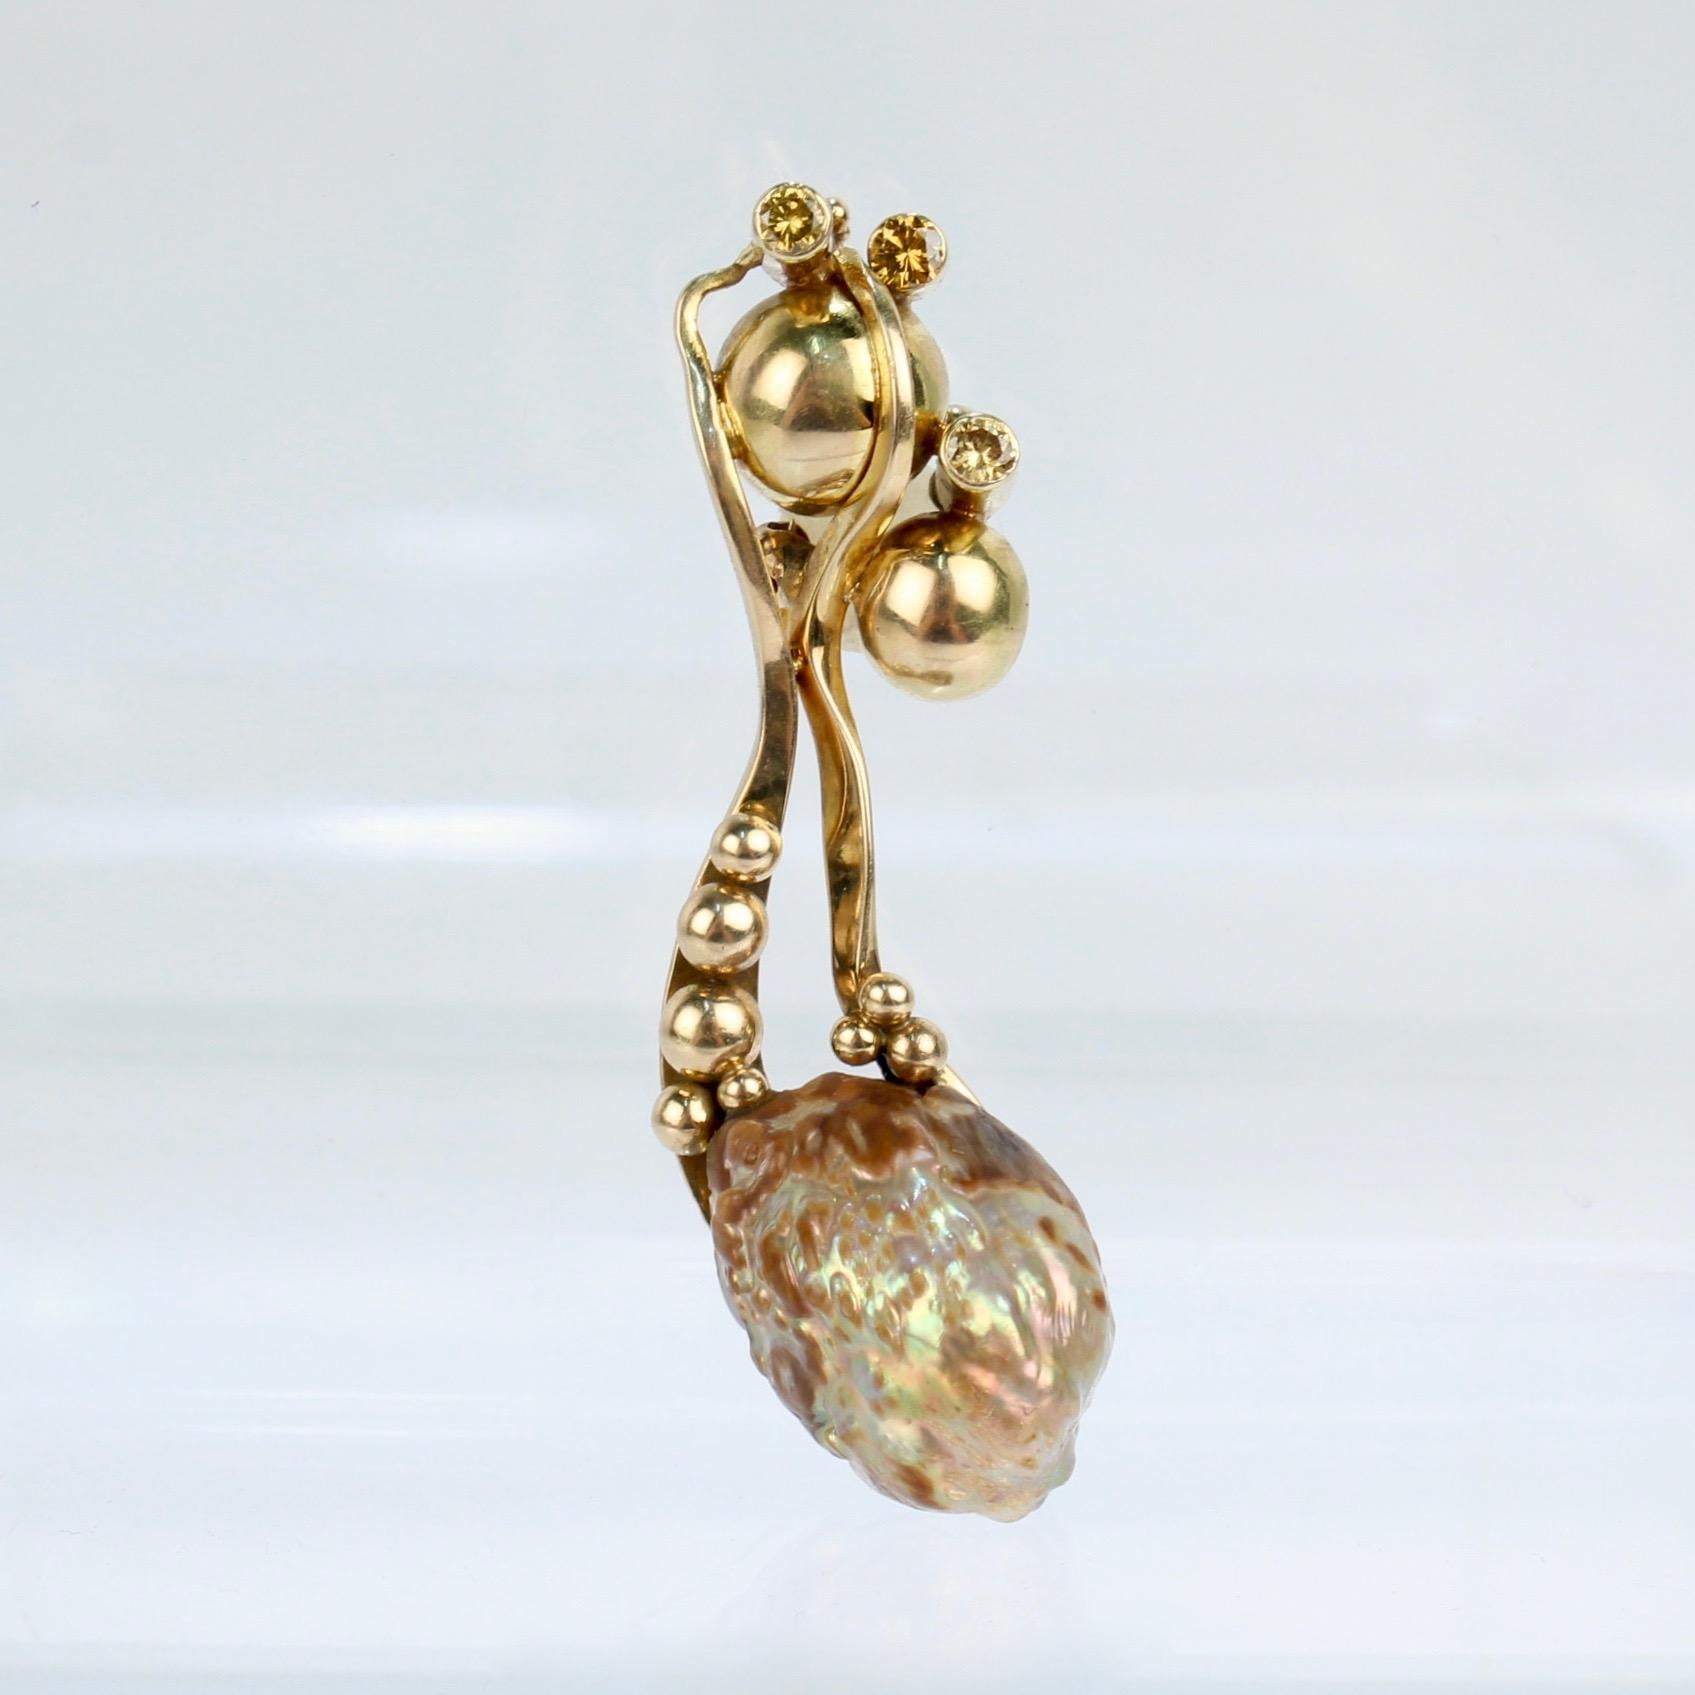 Modernist Biomorphic 14 Karat Gold Yellow Diamond & Baroque Pearl Brooch or Pin For Sale 1